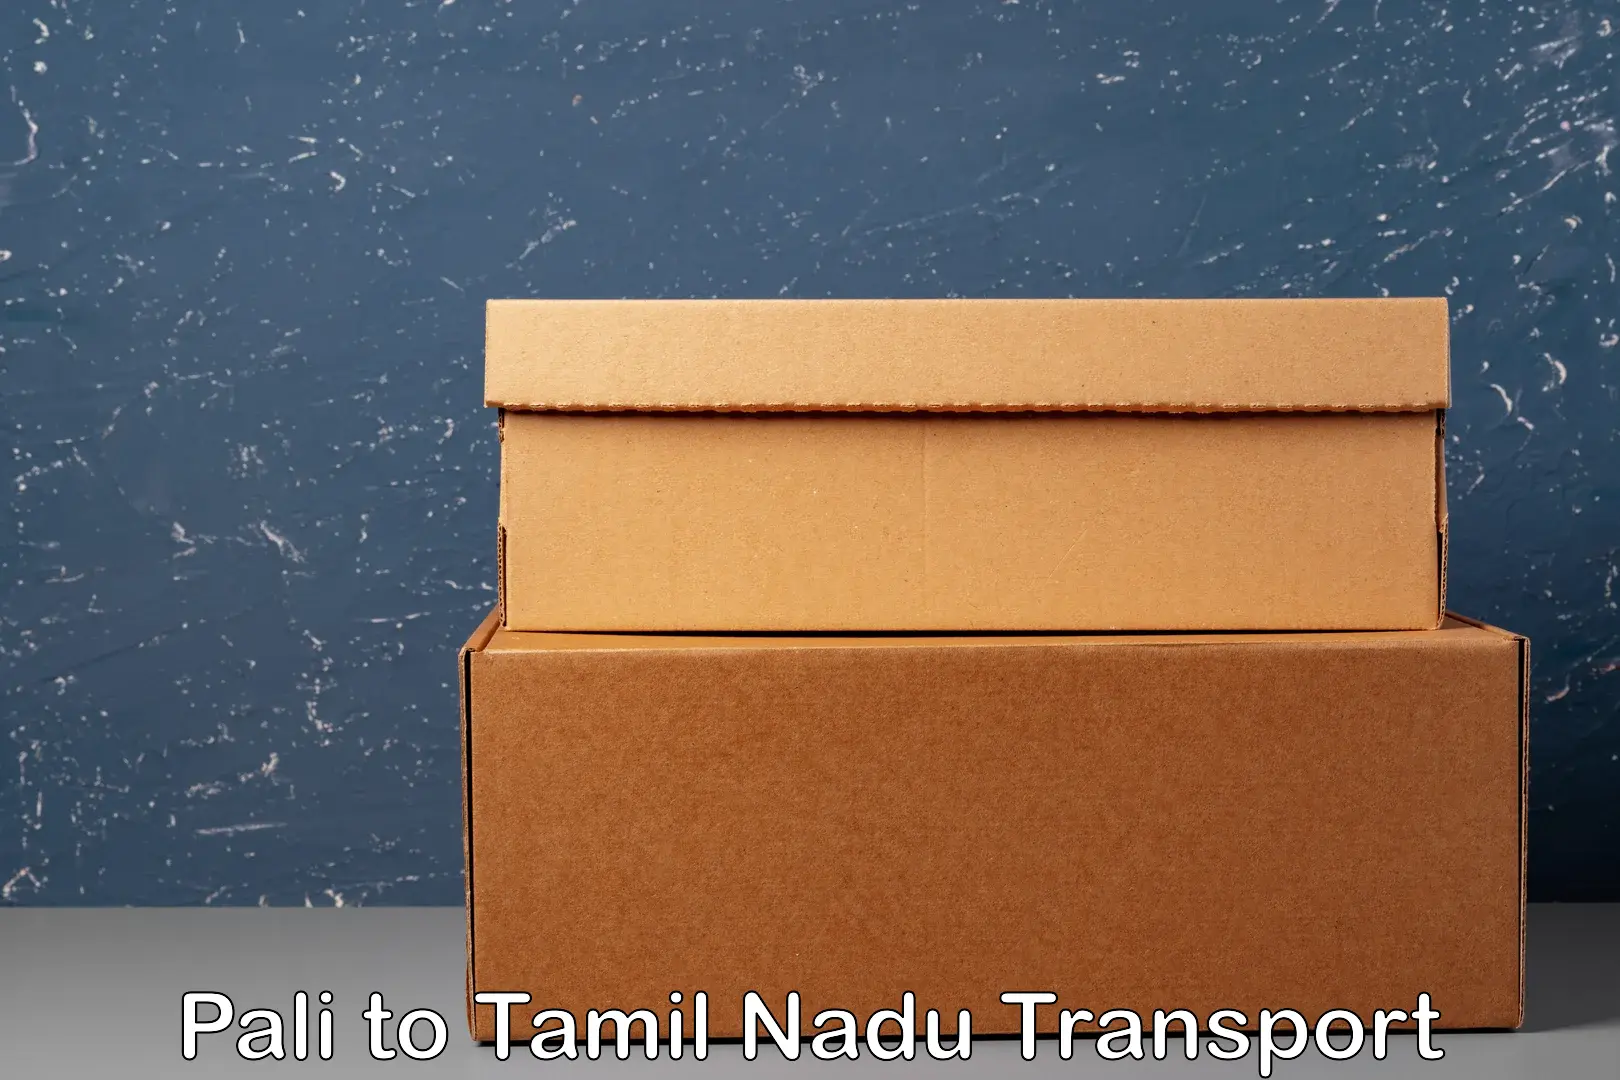 Container transport service Pali to Tamil Nadu